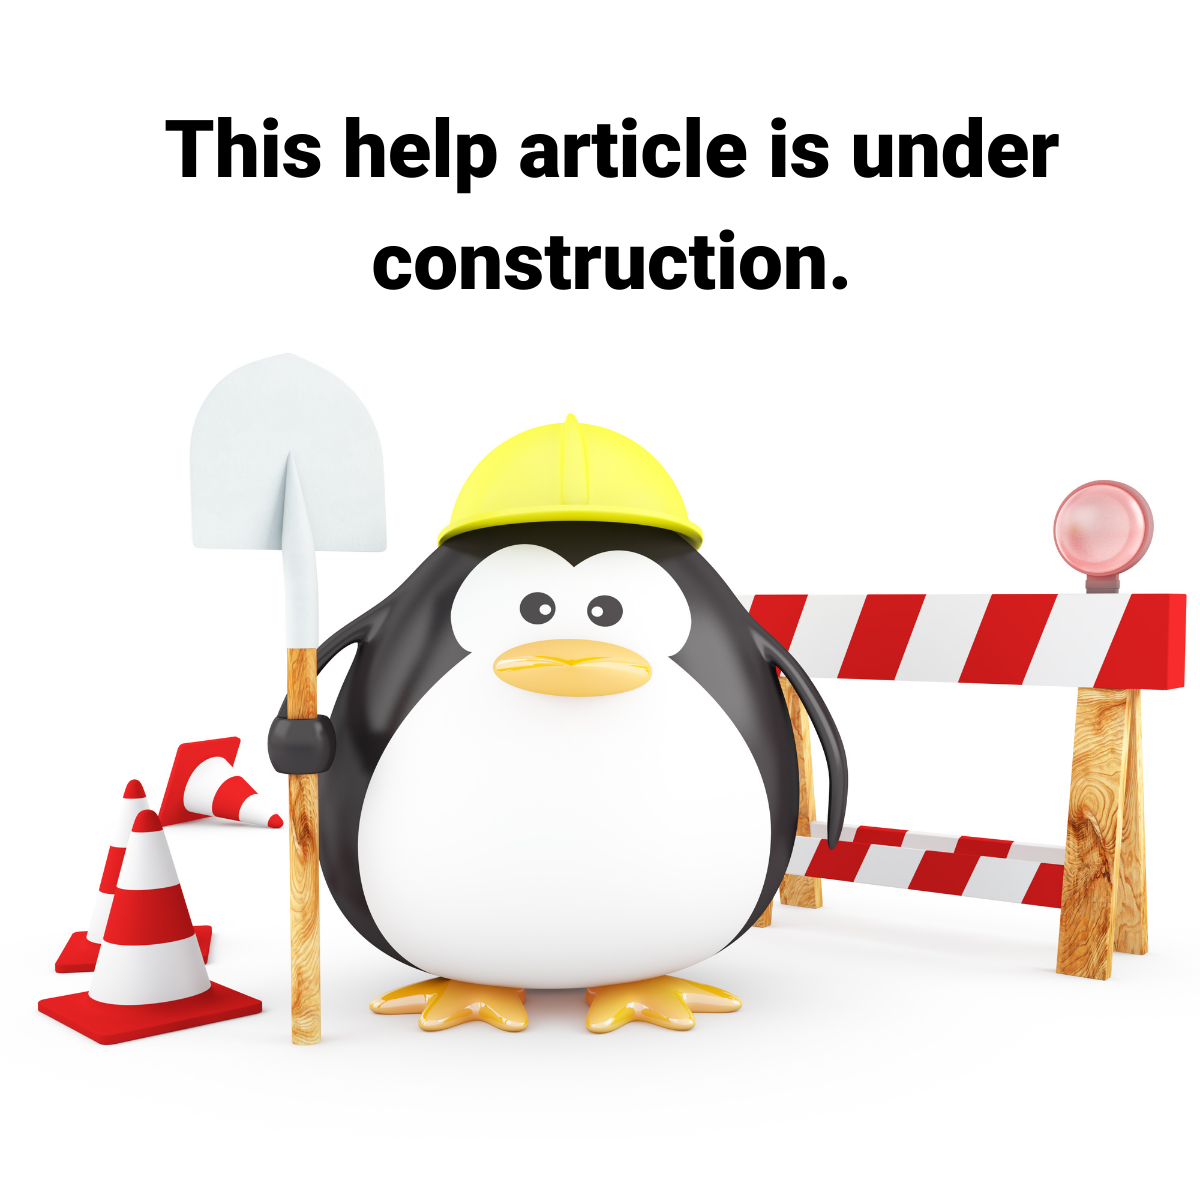 Under_Construction.png